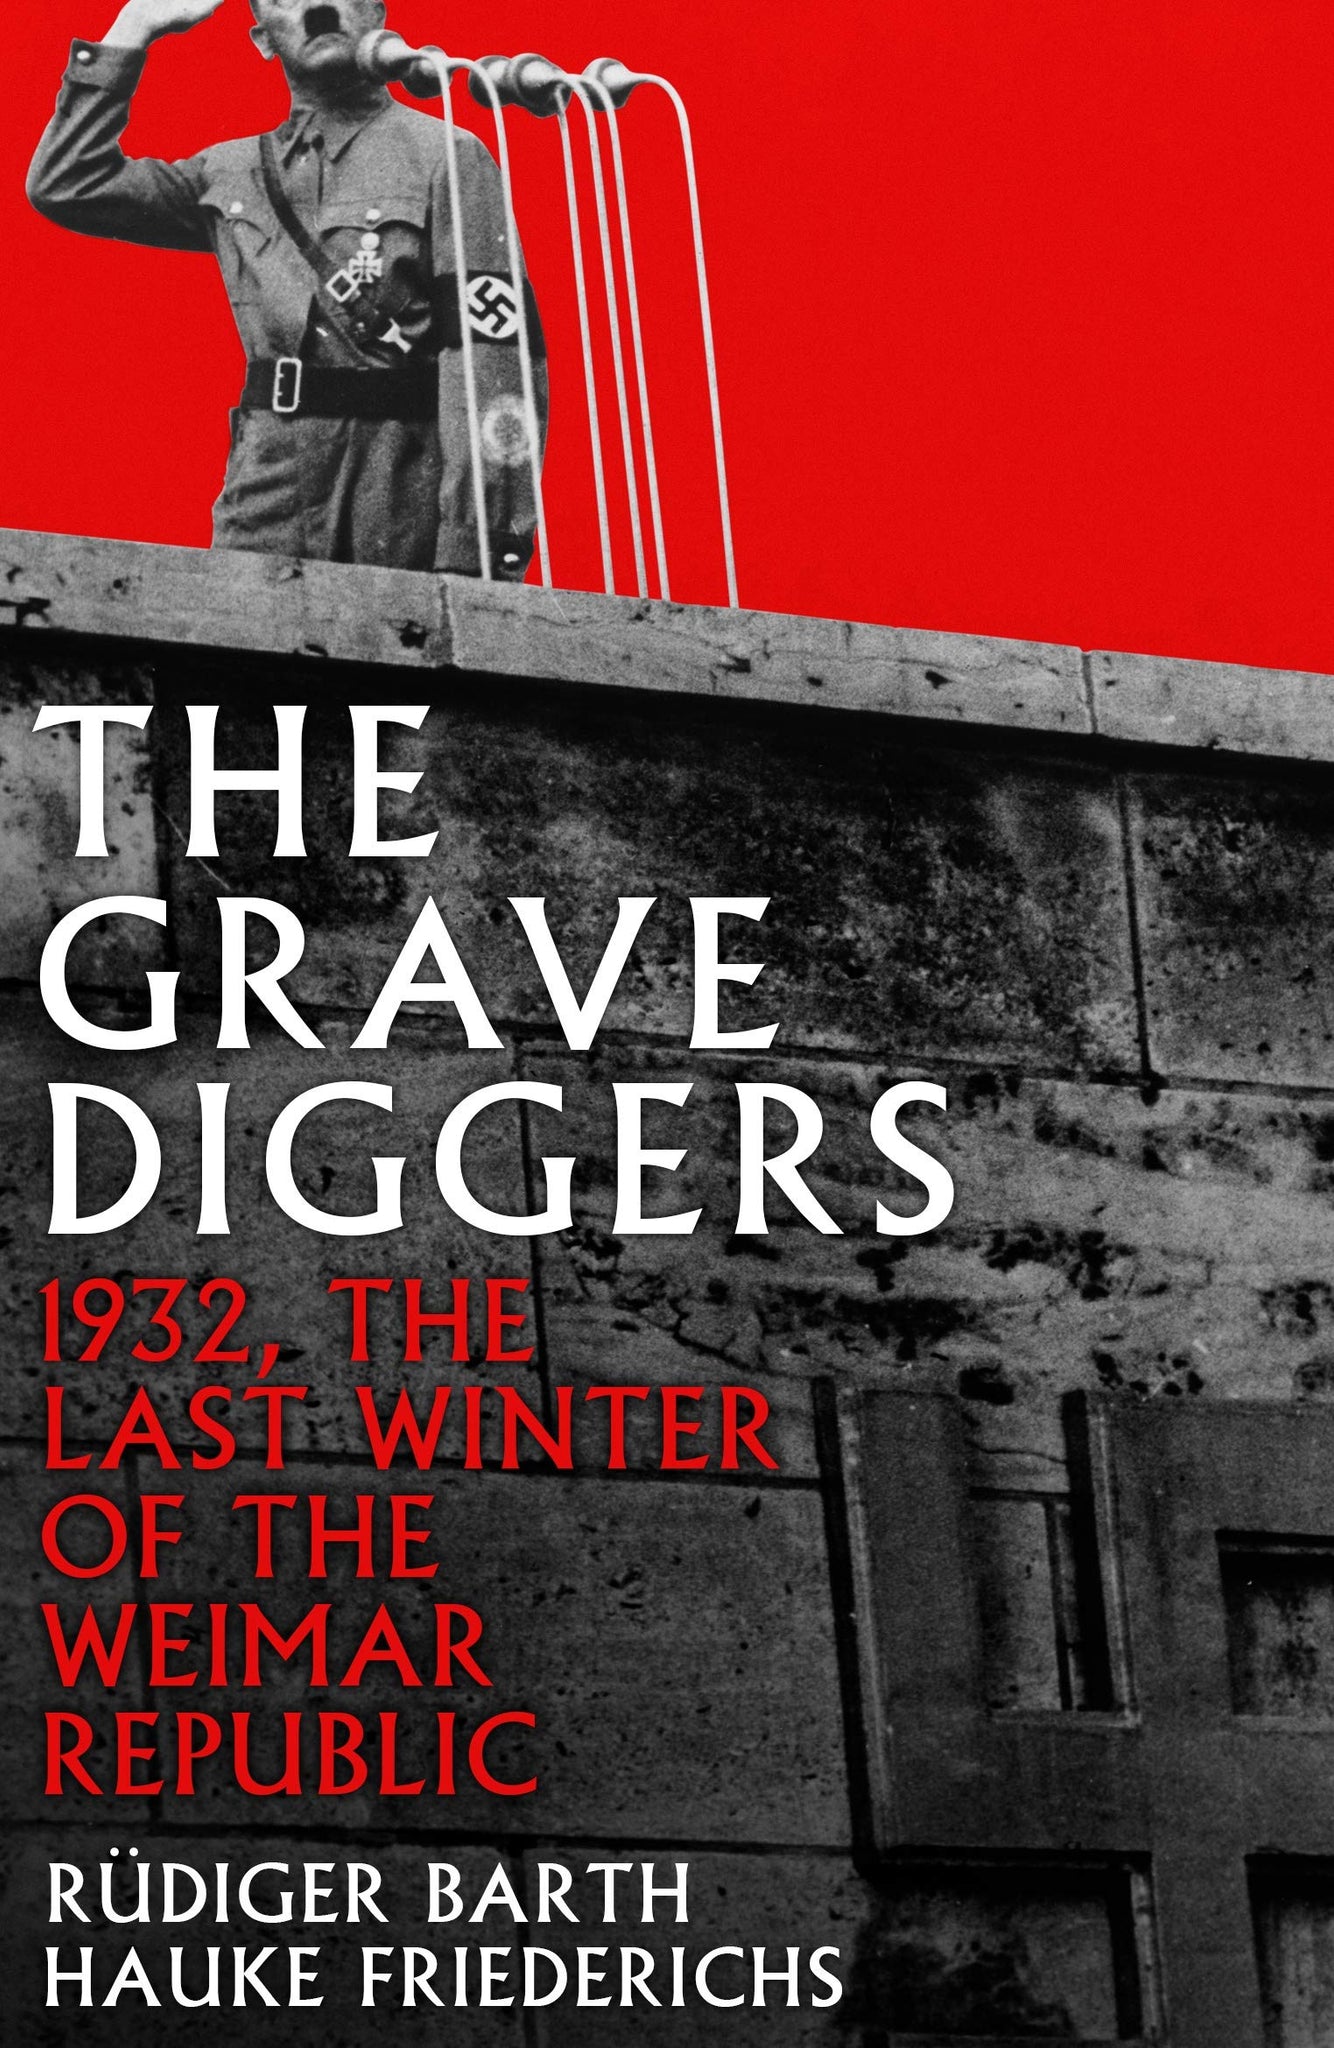 The Gravediggers: 1932, The Last Winter Of The Weimar Republic